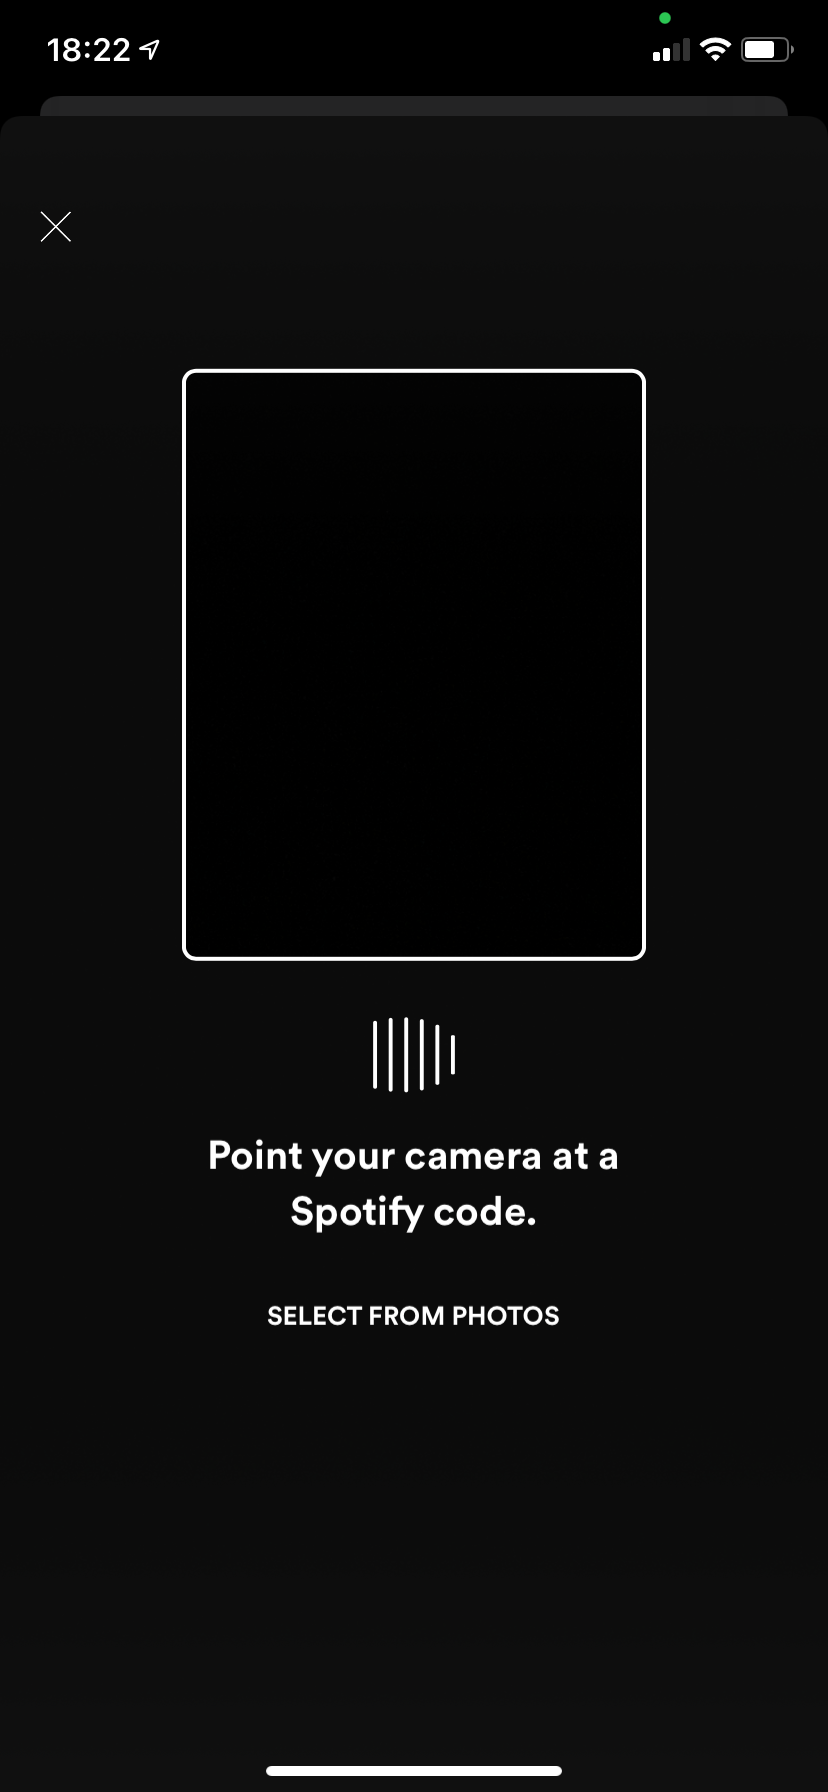 Spotify Scan Code Mobile